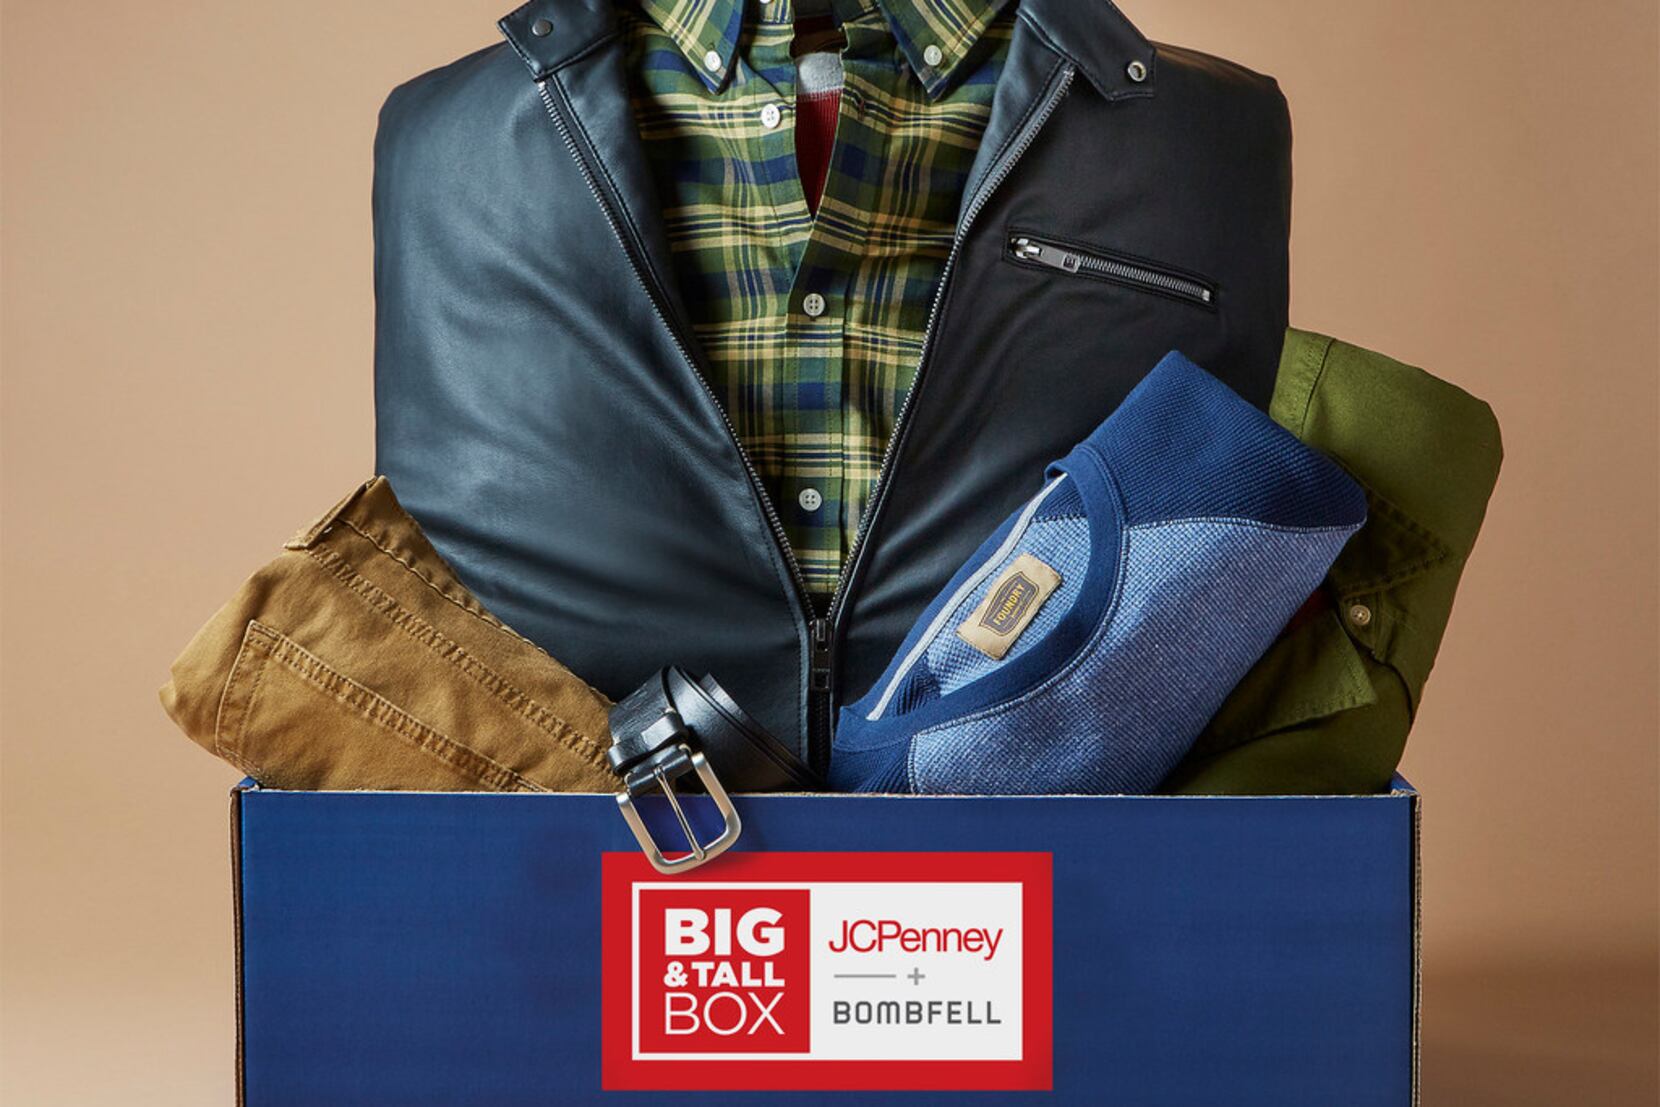 J.C. Penney enters subscription business for big and tall men with